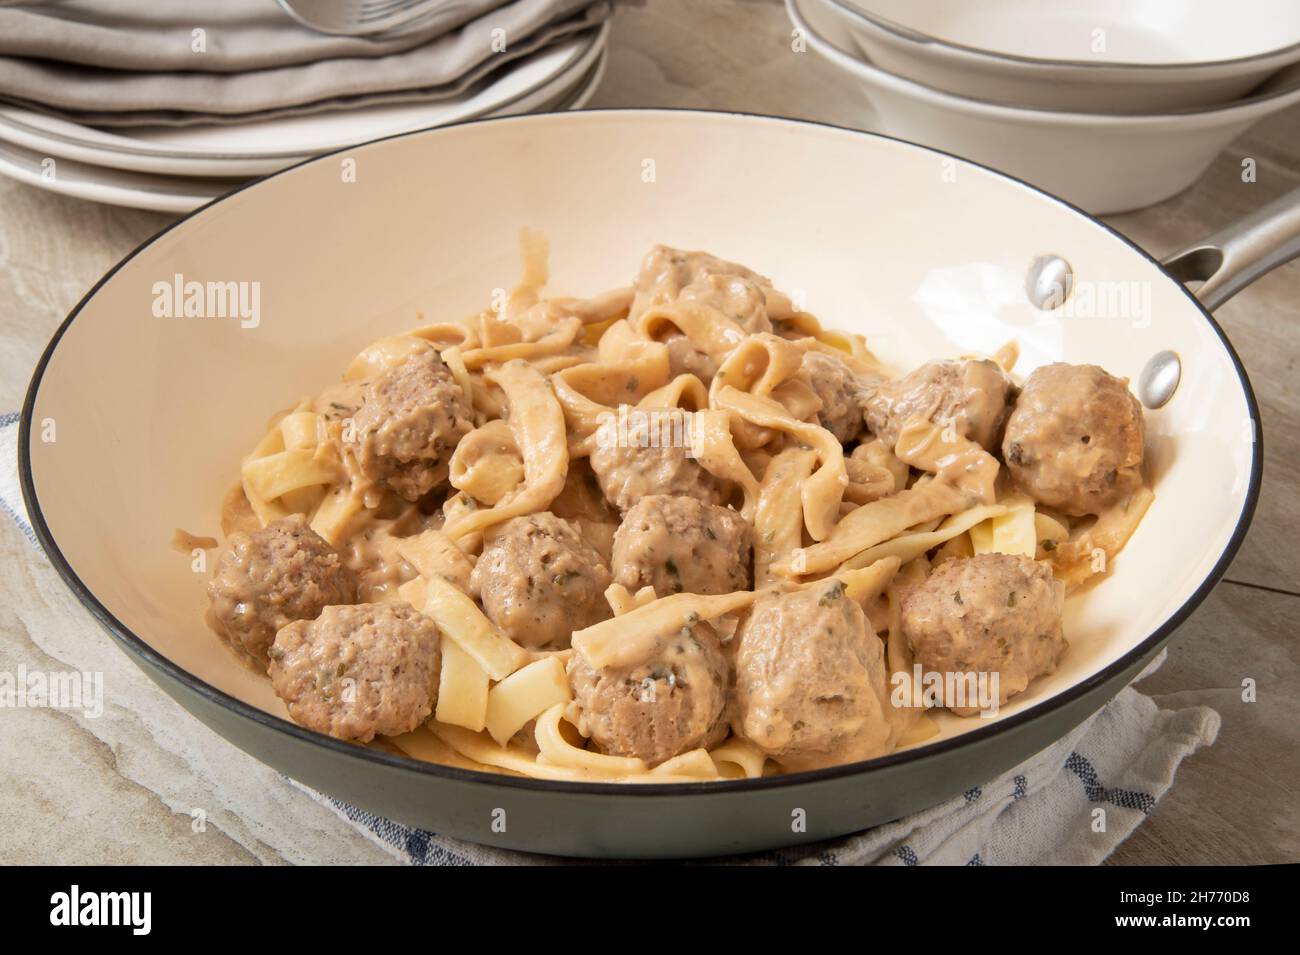 Homemade Swedish meatballs in a serving pan close up Stock Photo